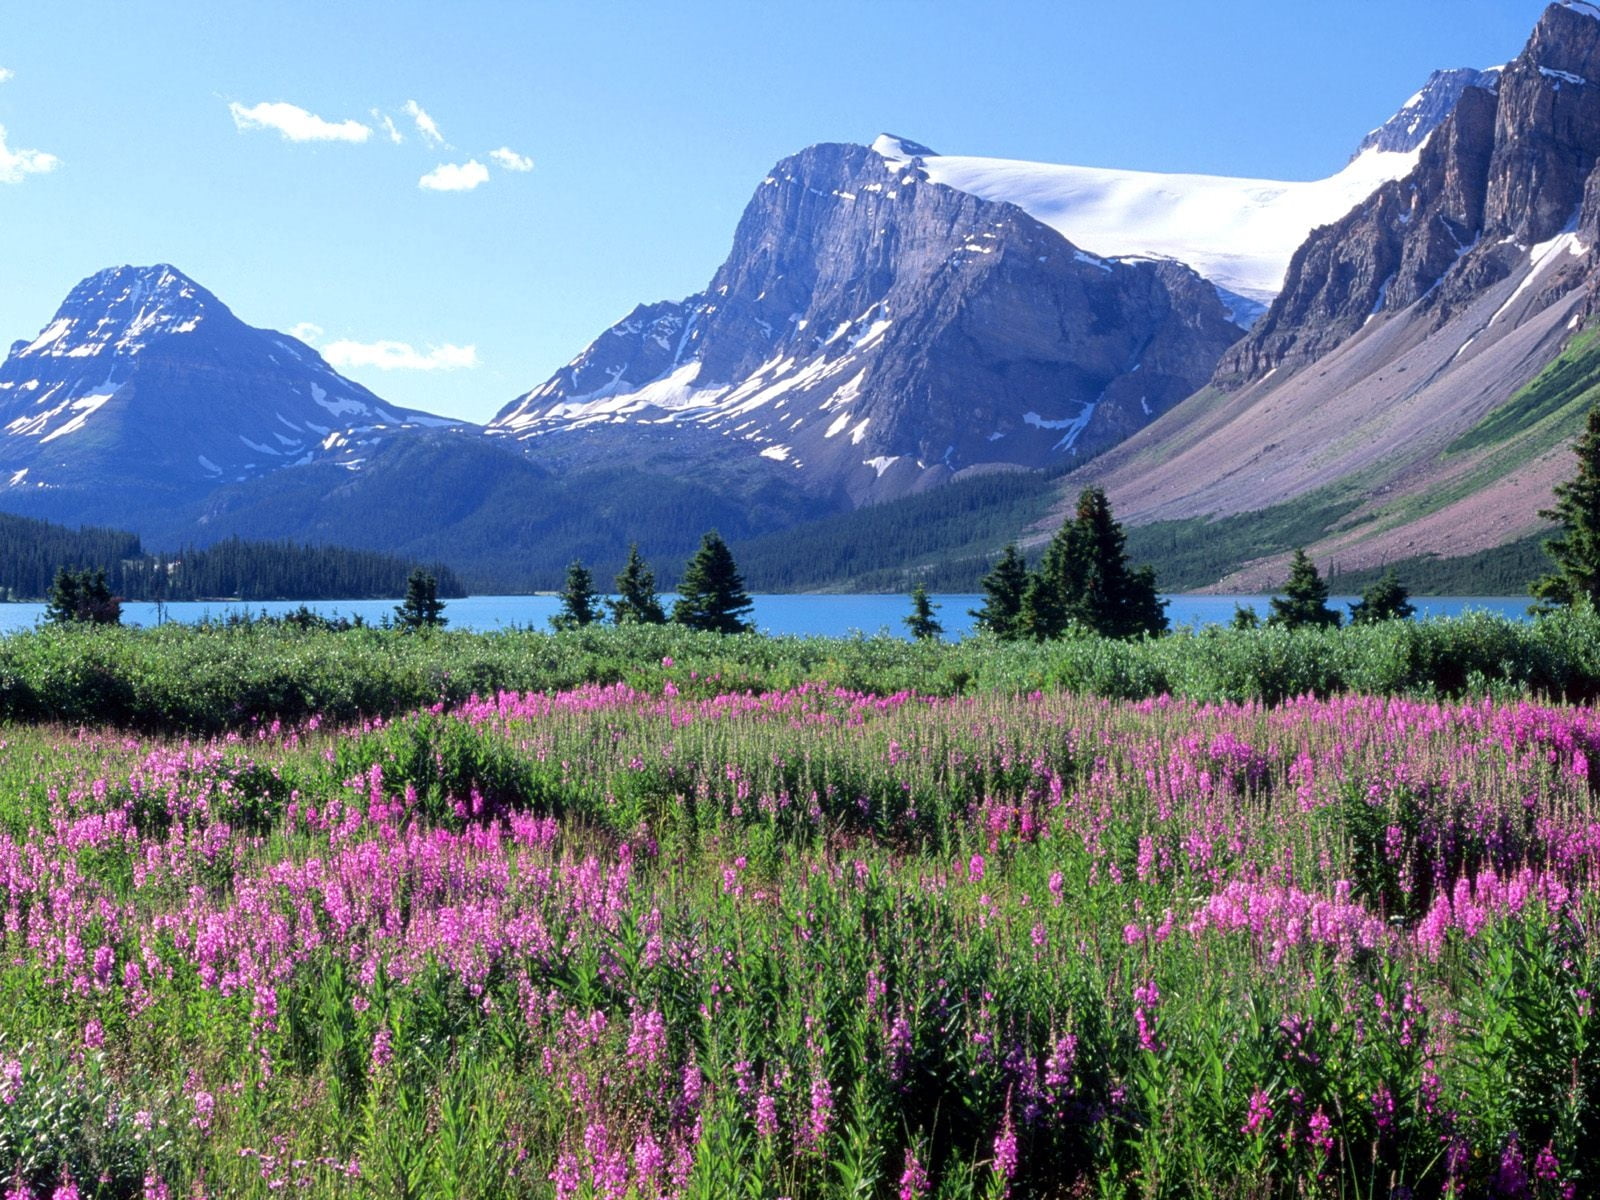 pink petaled flower field, mountains, trees, flowers, lake, canada